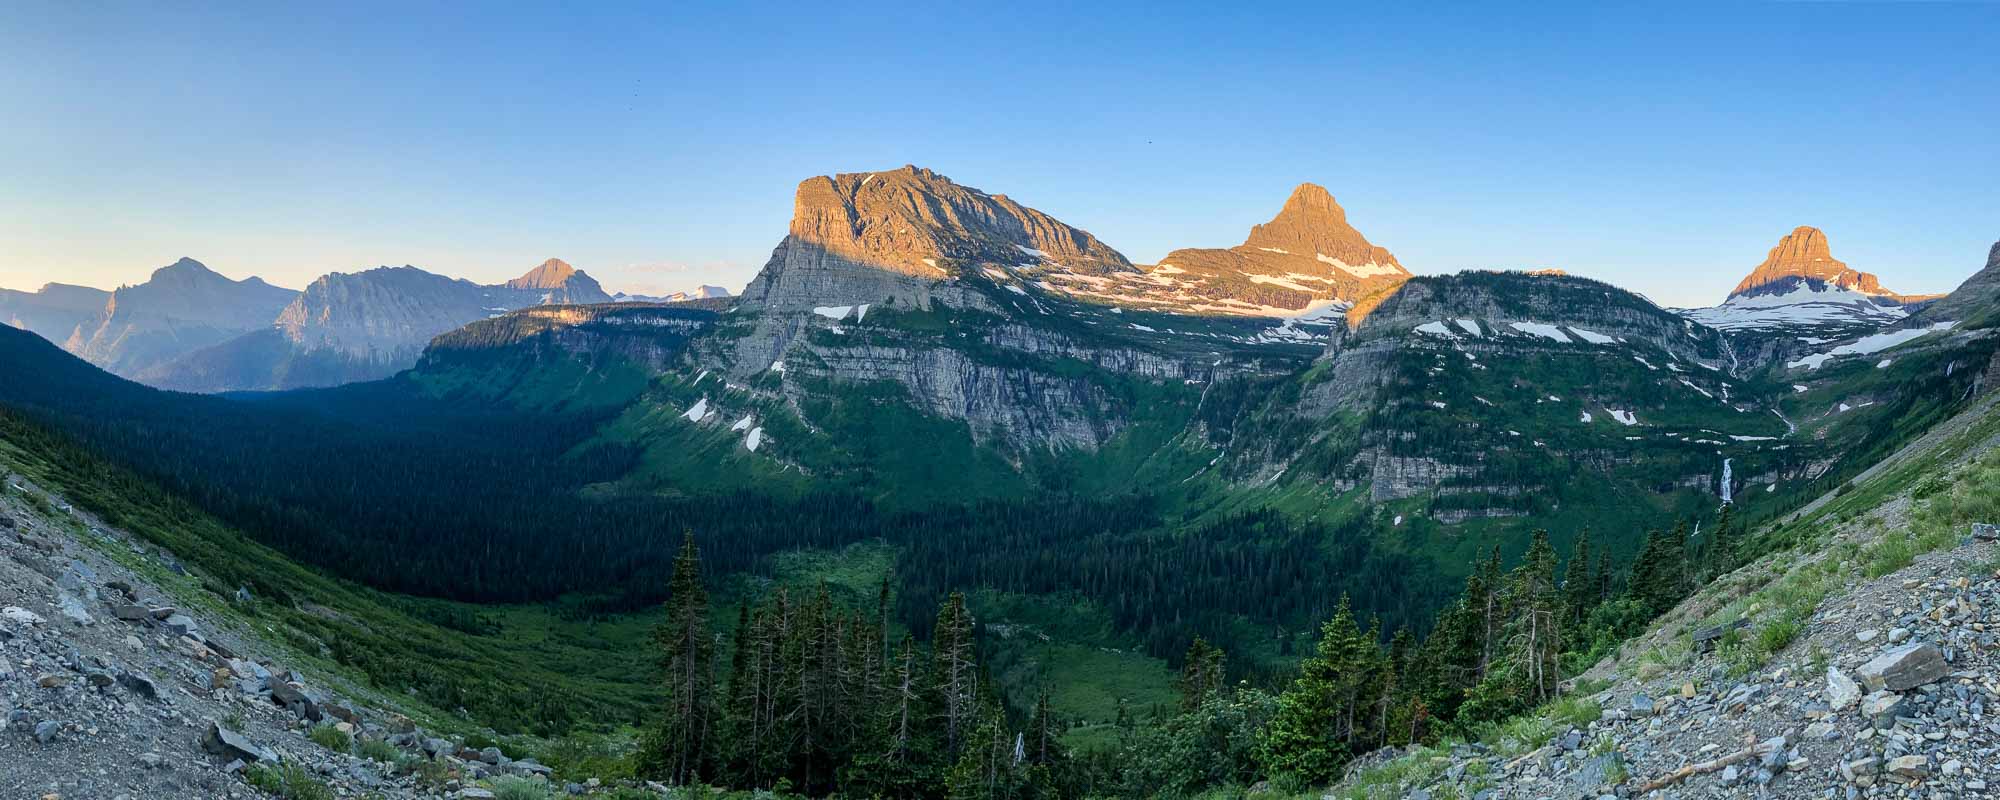 Going-to-the-Sun Road panorama near Logan Pass, Glacier National Park, best viewpoints in the national parks